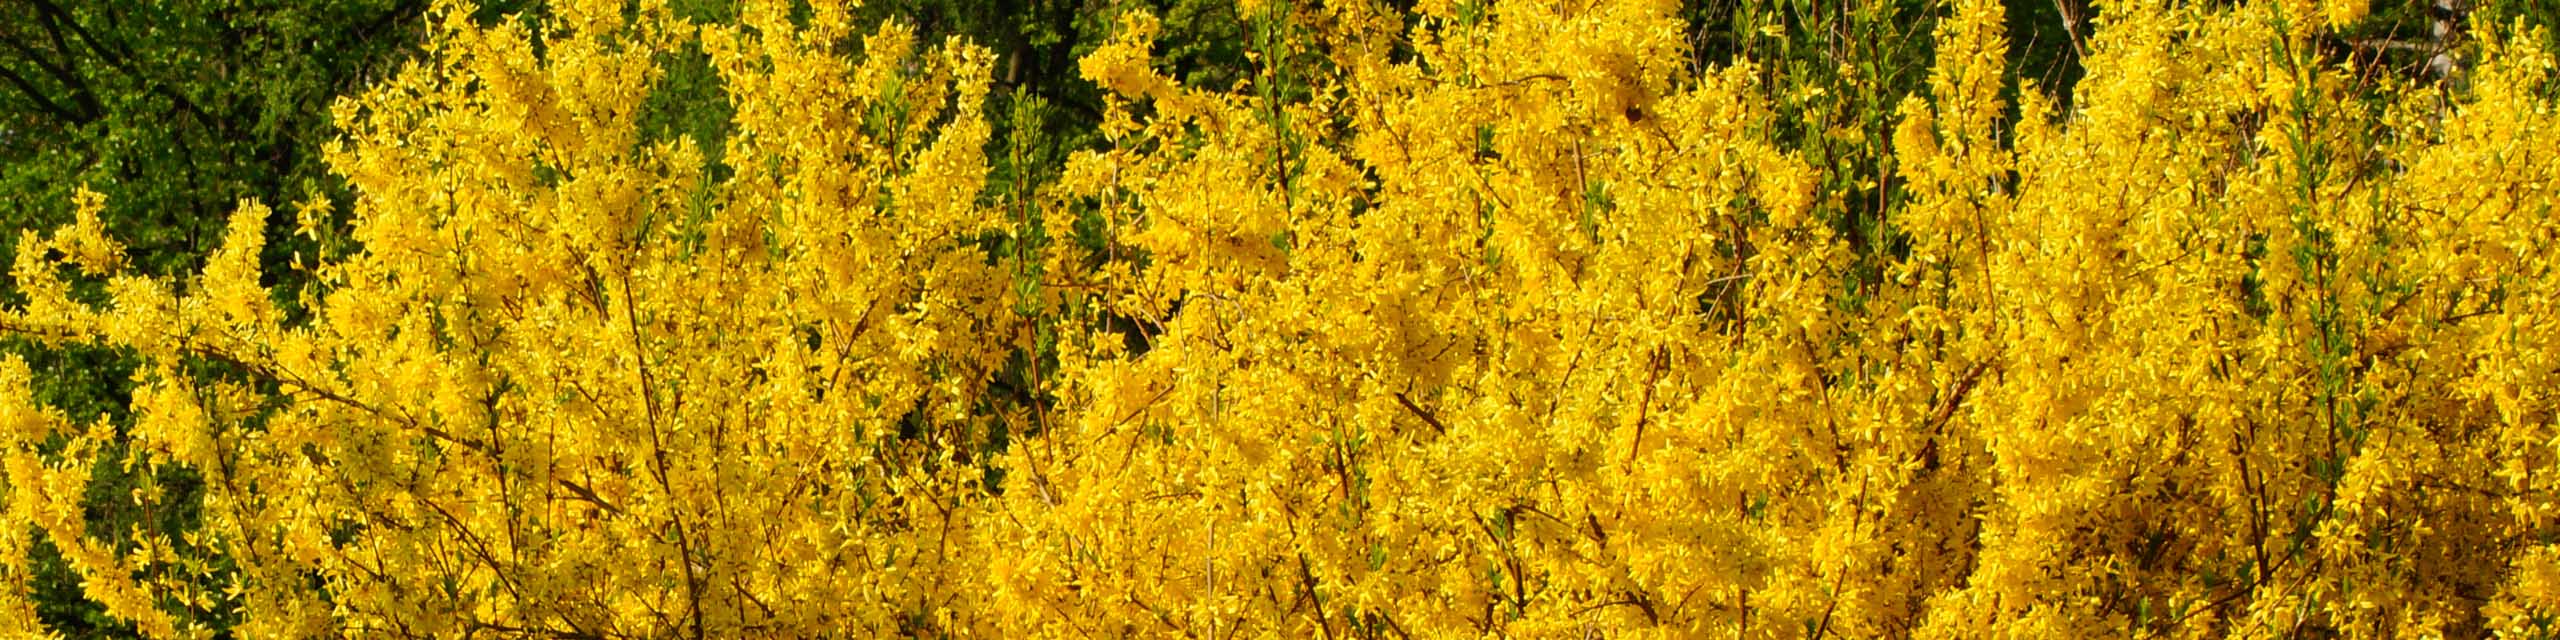 Forsythia bush with yellow flowers in the spring.